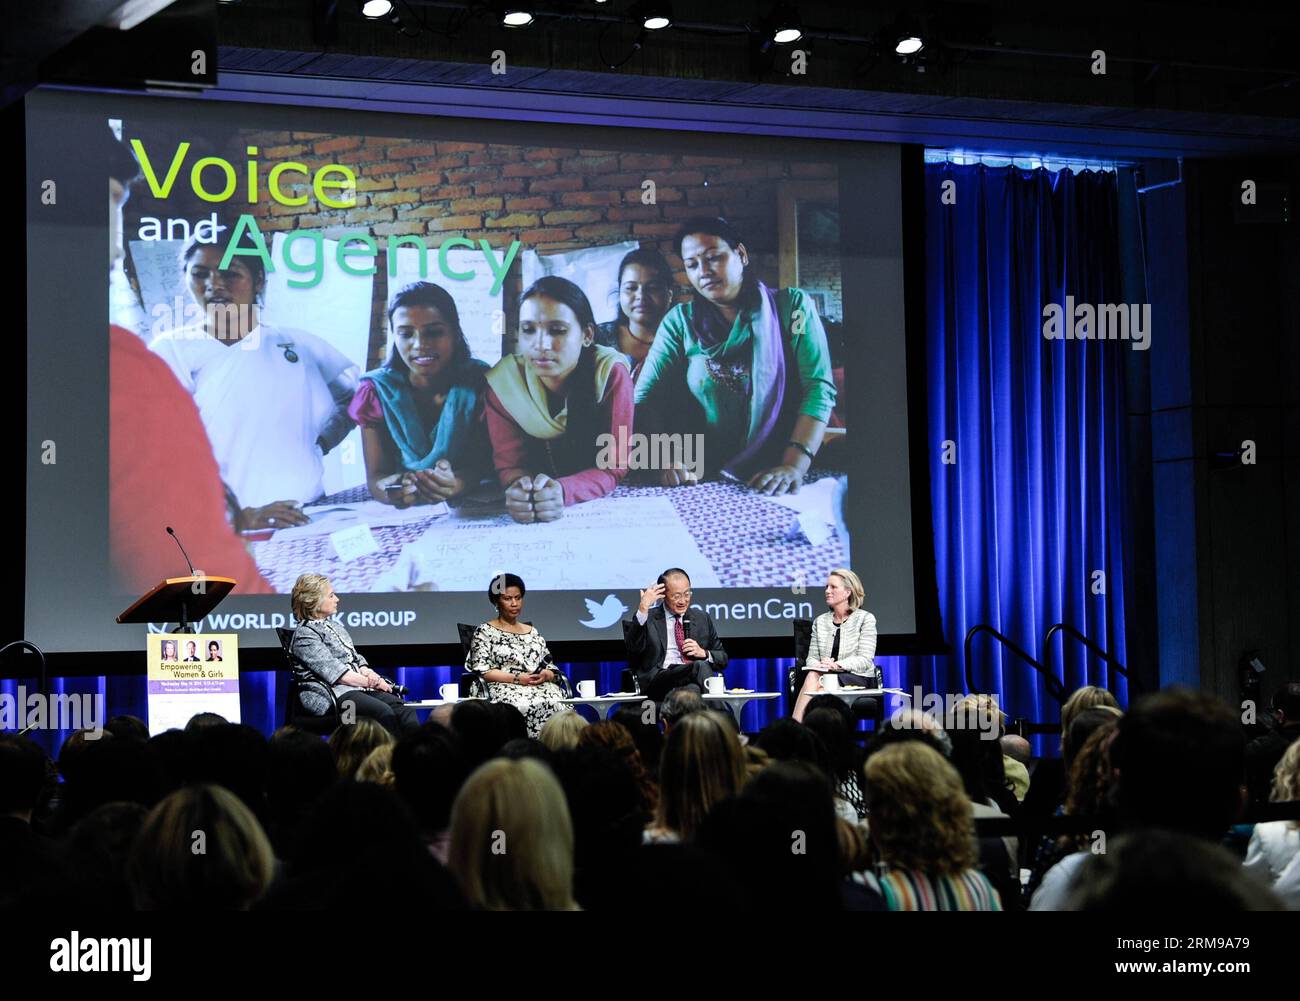 WASHINGTON D.C., May 14, 2014 - World Bank Group President Jim Yong Kim (2nd R) speaks at the launch ceremony of World Bank Group s new report Voice and Agency: Empowering Women and Girls for Shared Prosperity finds in Washington D.C., capital of the United States, May 14, 2014. Girls with little or no education are far more likely to be married as children, suffer domestic violence, live in poverty, and lack a say over household spending or their own health care than better-educated peers, according to the new report by the World Bank Group on Wednesday. (Xinhua/Bao Dandan) US-WASHINGTON-WORL Stock Photo